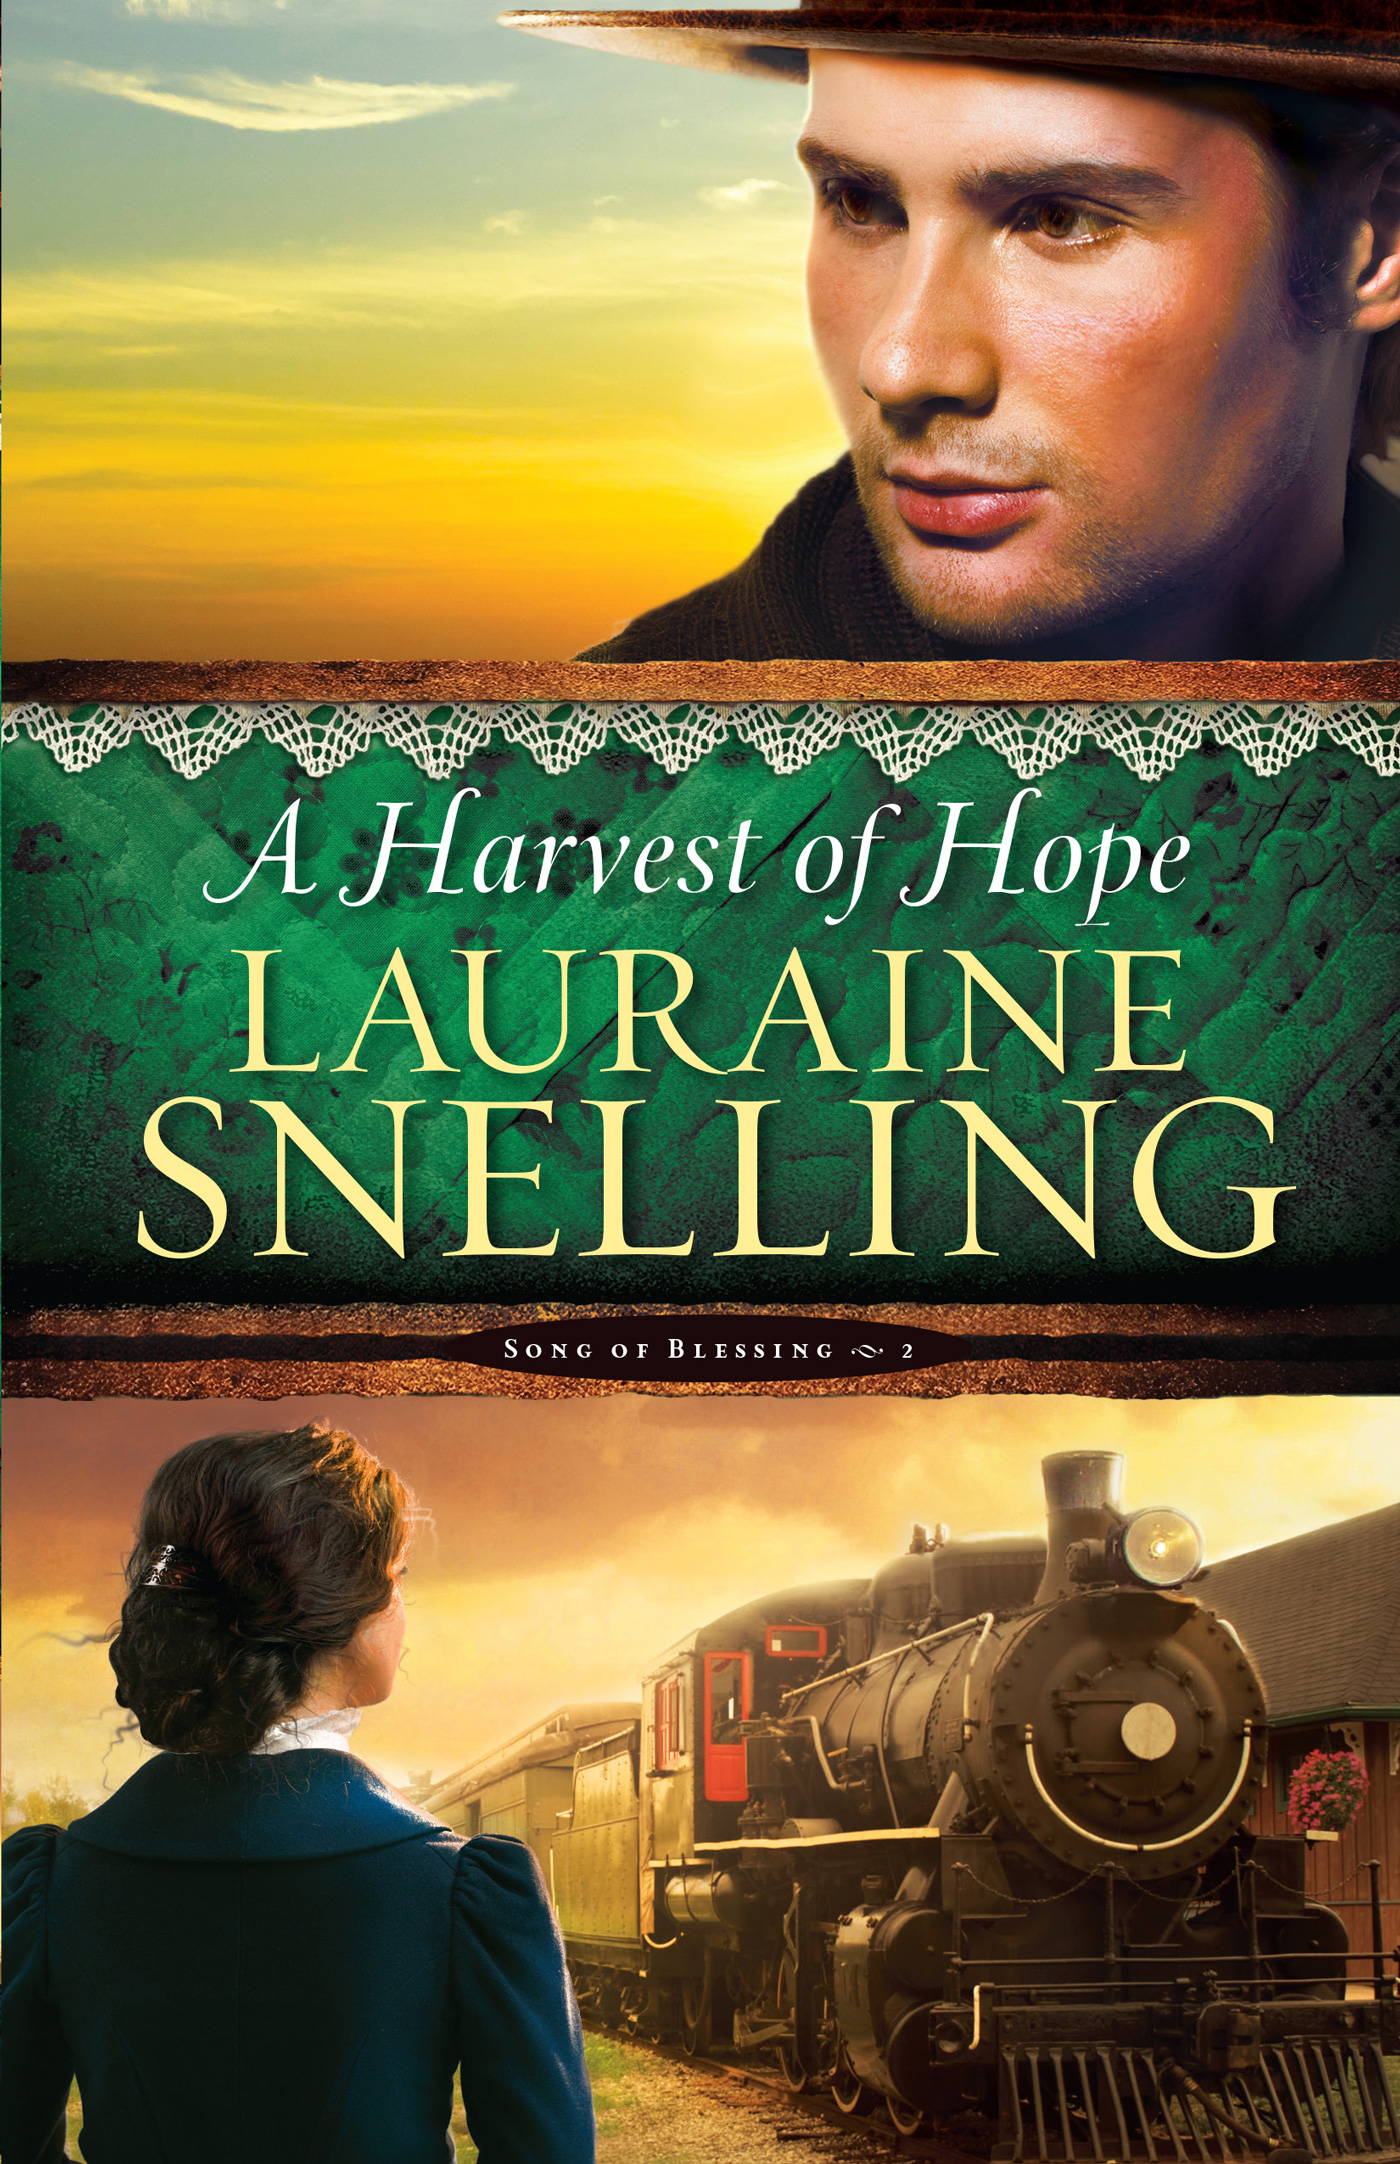 A Harvest of Hope (2015) by Lauraine Snelling